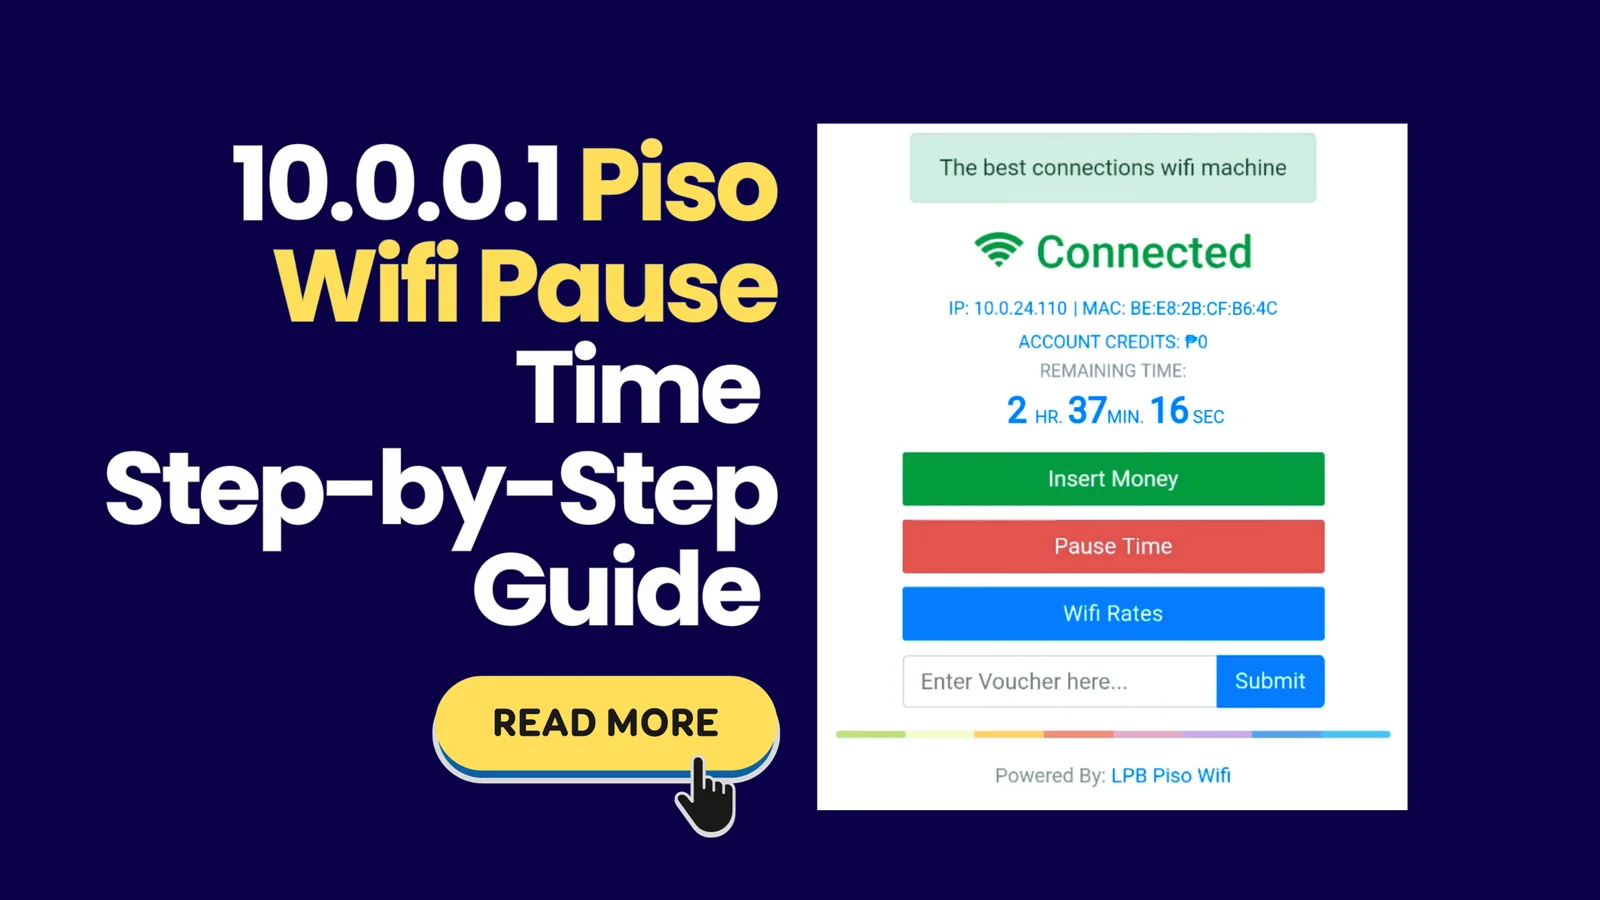 LPB Piso wifi 10.0.0.1 Pause Time Benefits, & Features